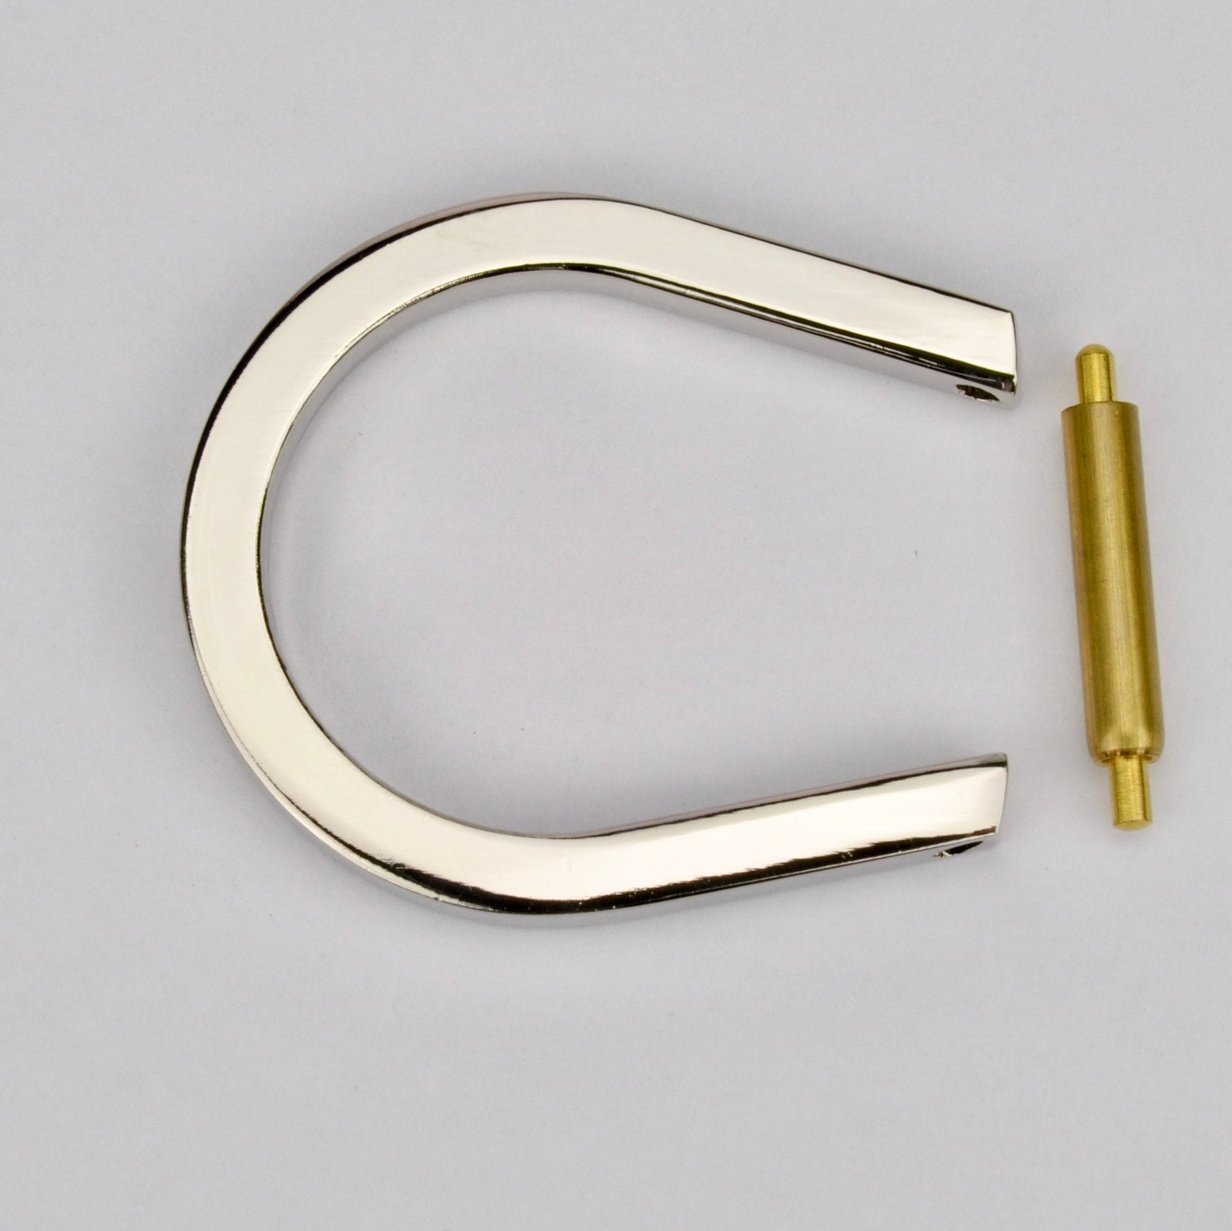 D-Ring Nickel 16 mm with Screw Pin